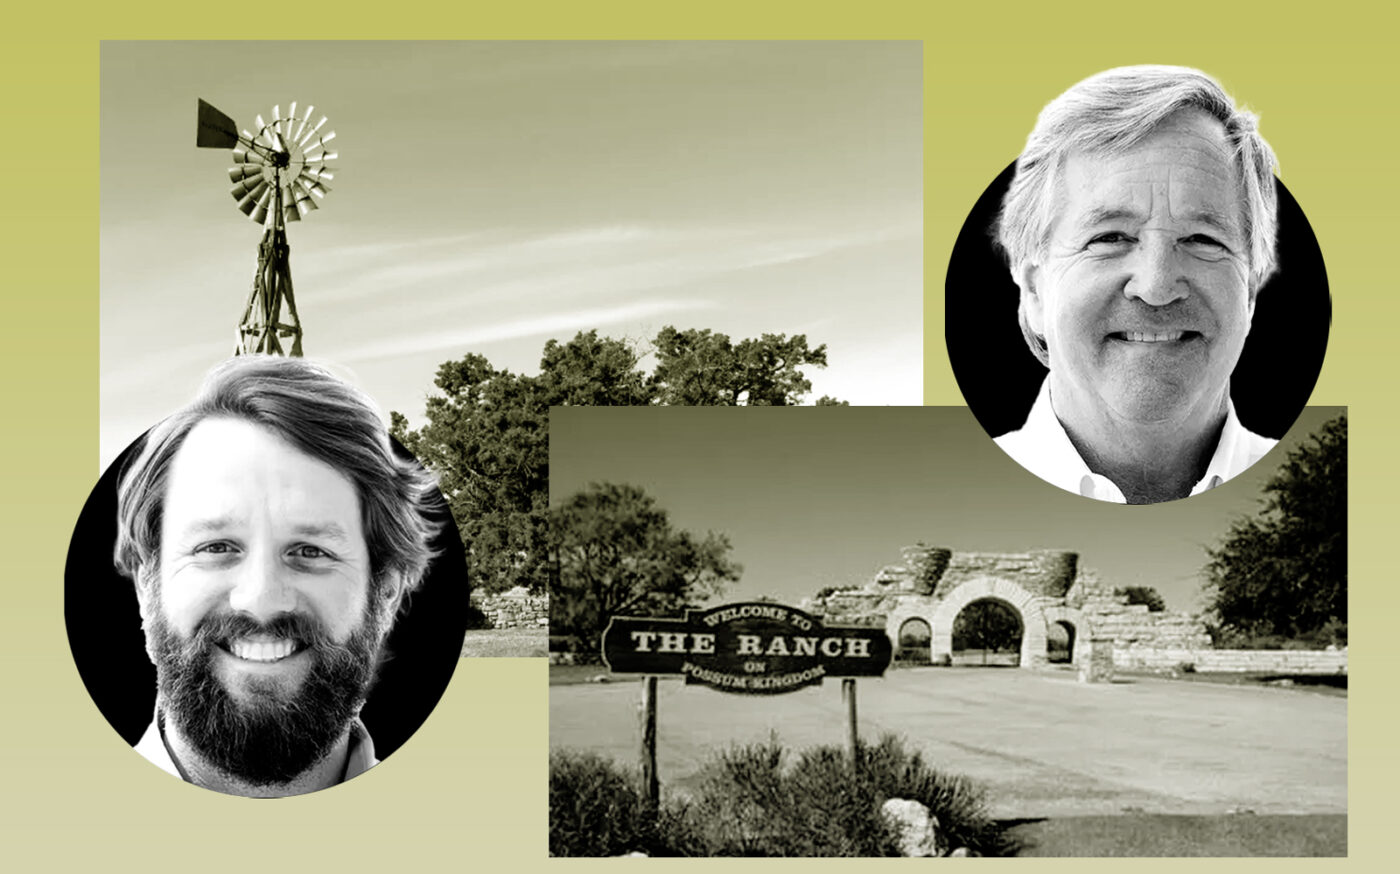 Possum Kingdom Ranch and Sotheby's Harlan Ray and David Burgher